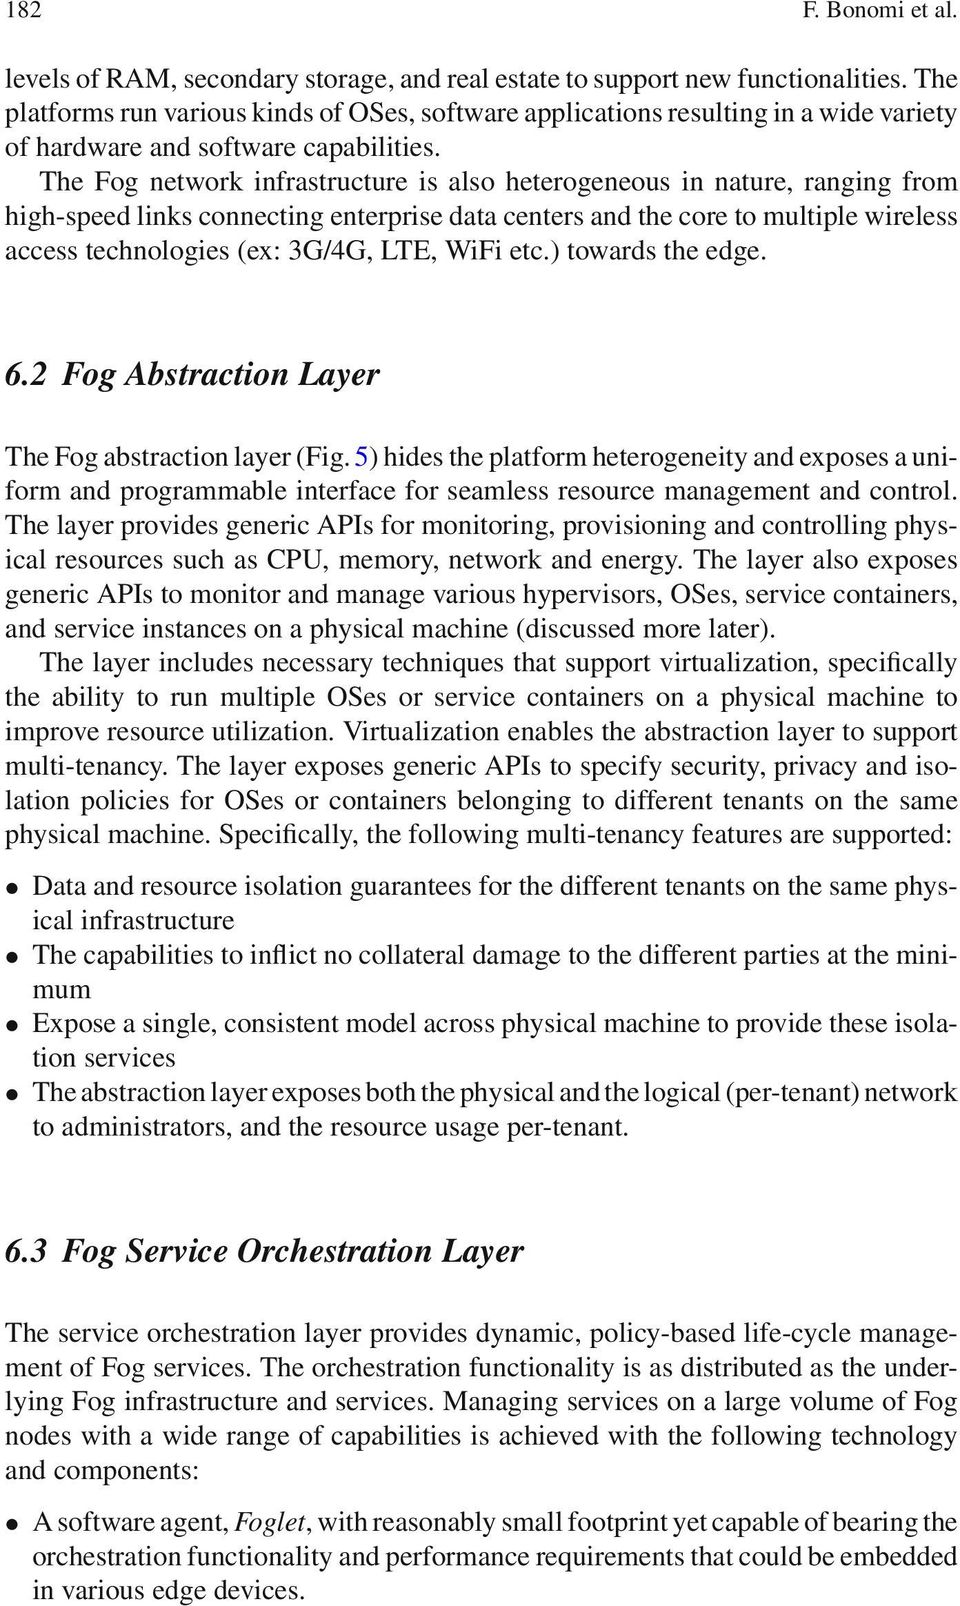 The Fog network infrastructure is also heterogeneous in nature, ranging from high-speed links connecting enterprise data centers and the core to multiple wireless access technologies (ex: 3G/4G, LTE,